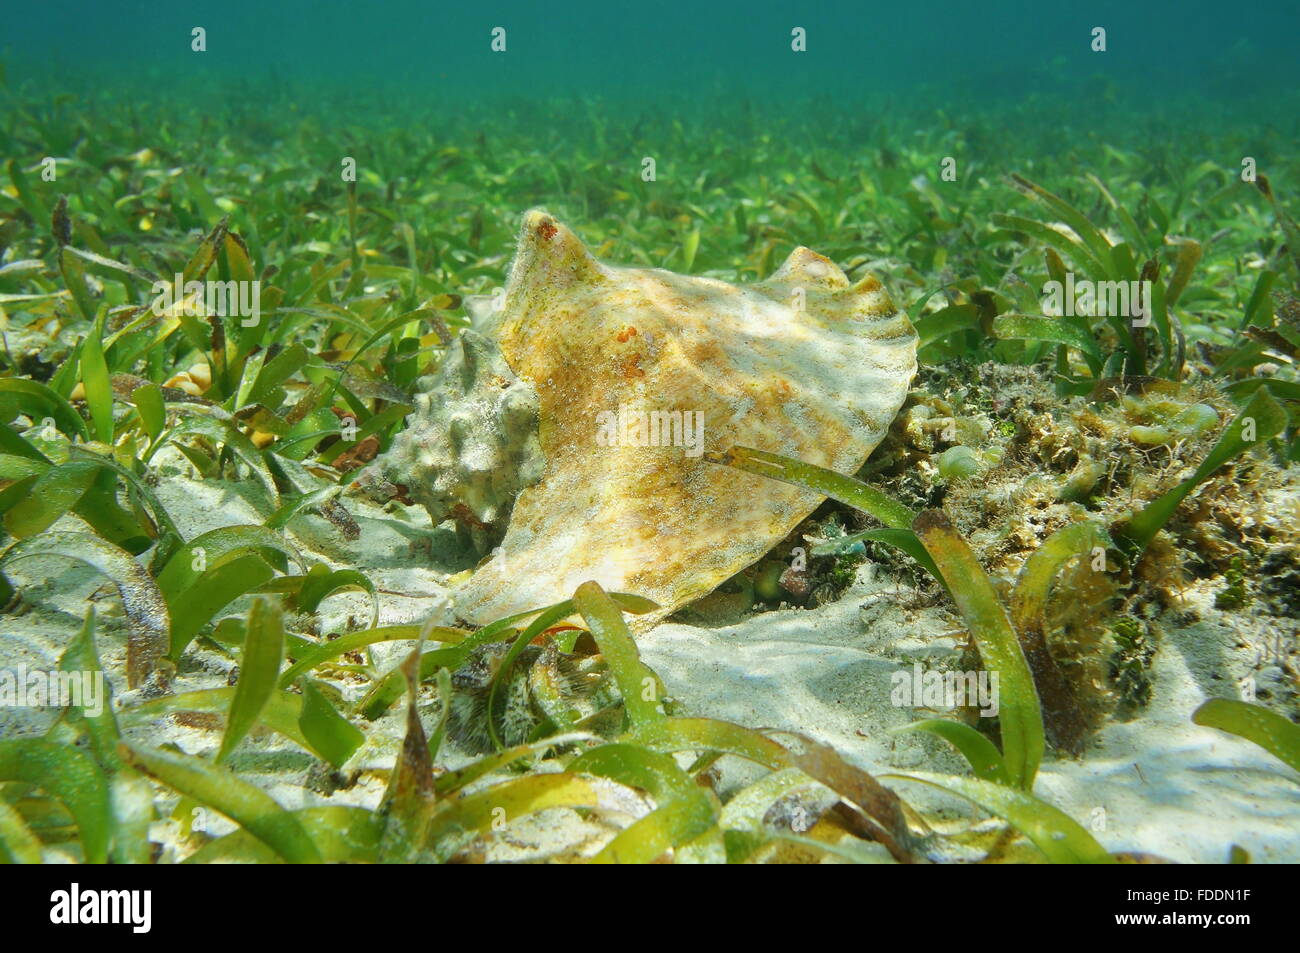 Shell of queen conch, Lobatus gigas, underwater on seabed with seagrass, Caribbean sea Stock Photo